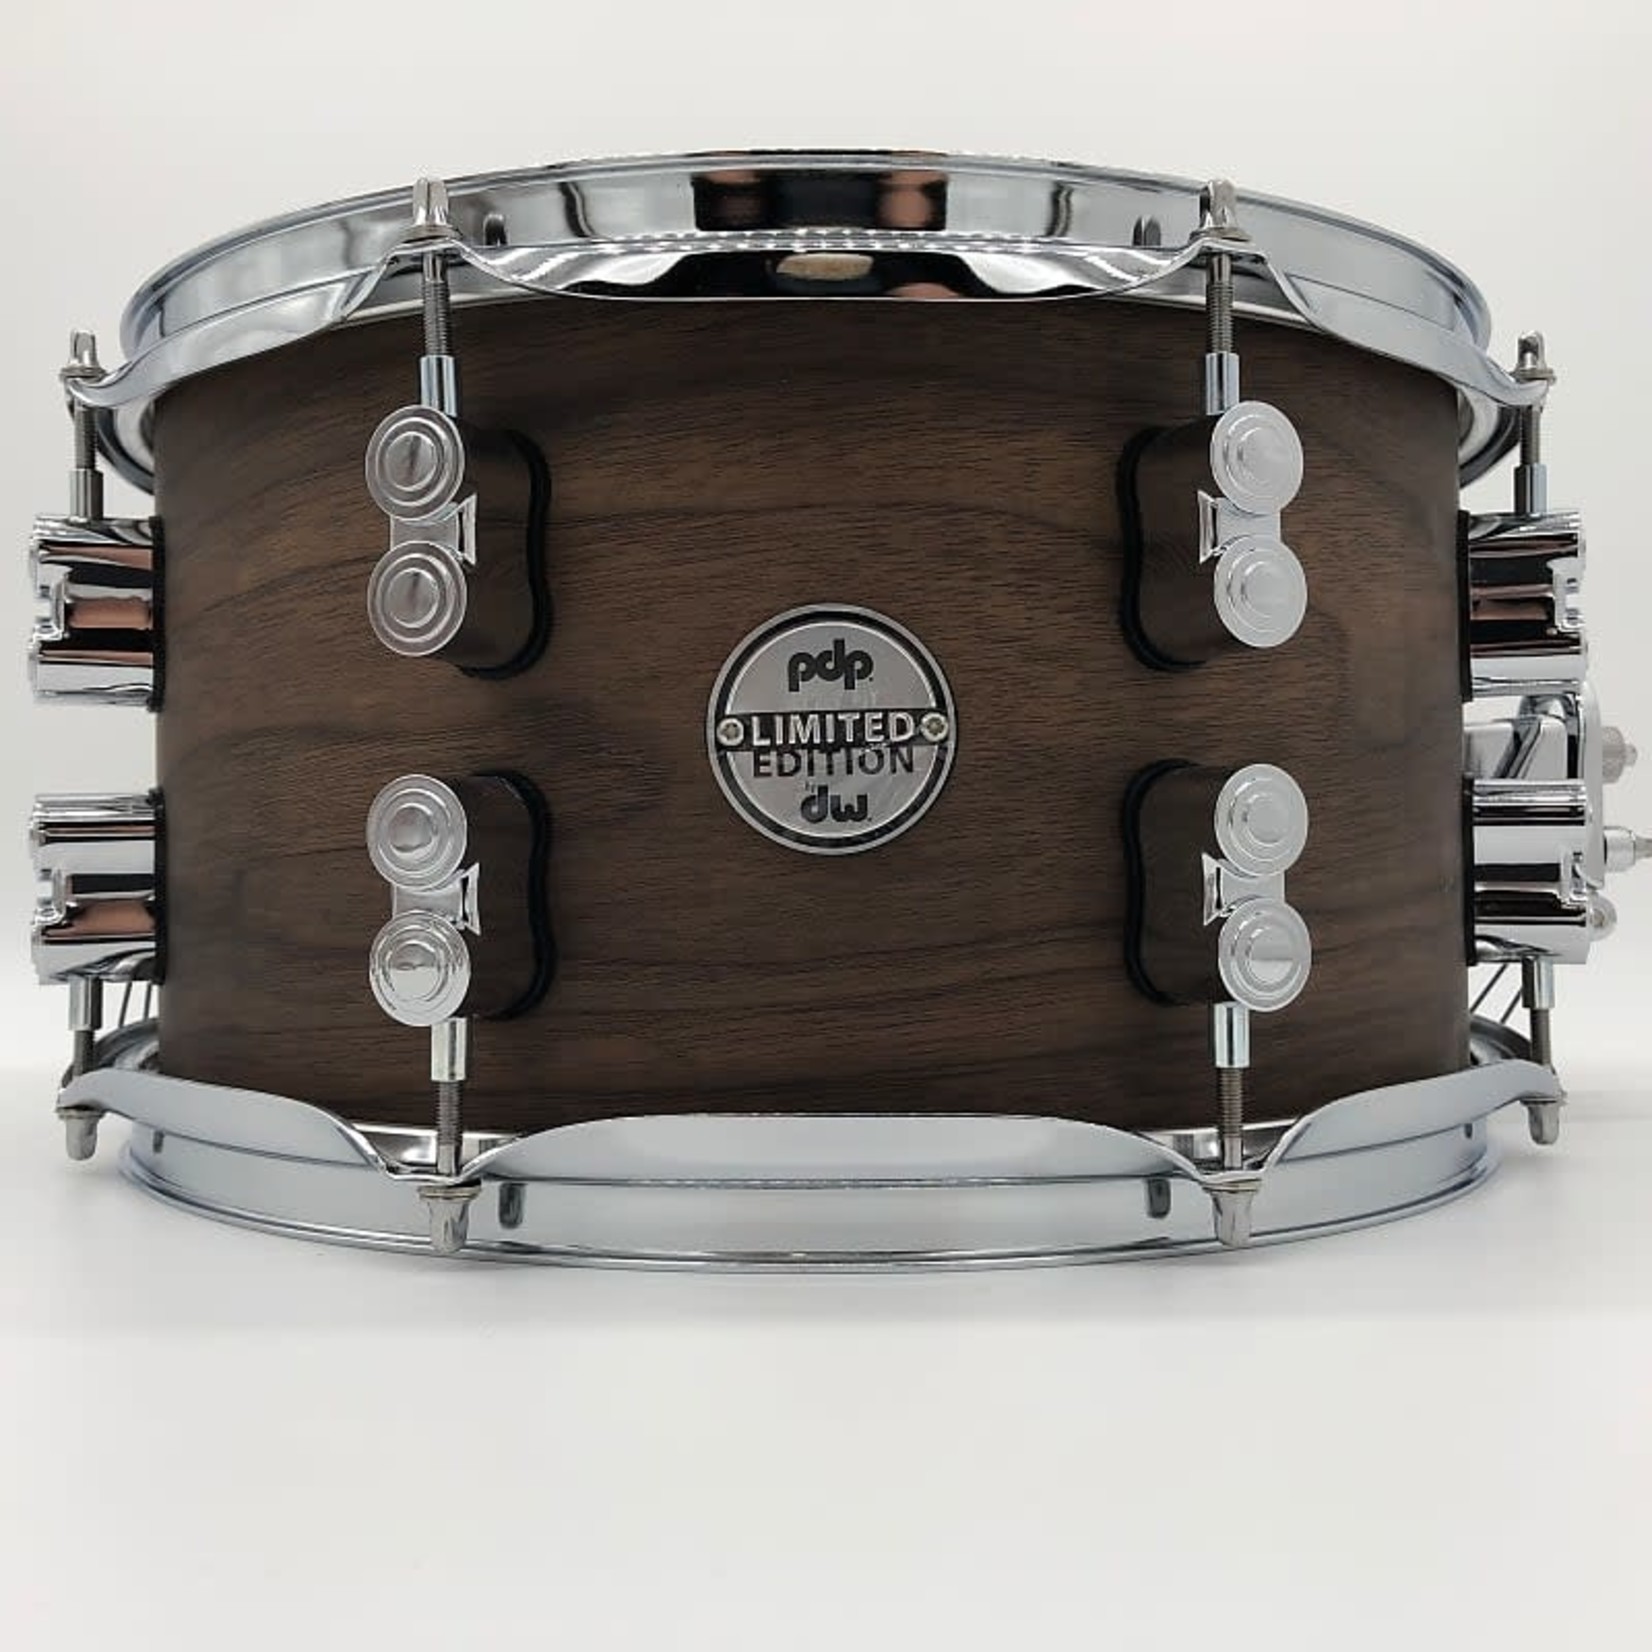 PDP PDP Concept Series Limited Edition 7X13” 20-Ply Hybrid/Walnut/Maple Snare Drum PDSN0713MWNS